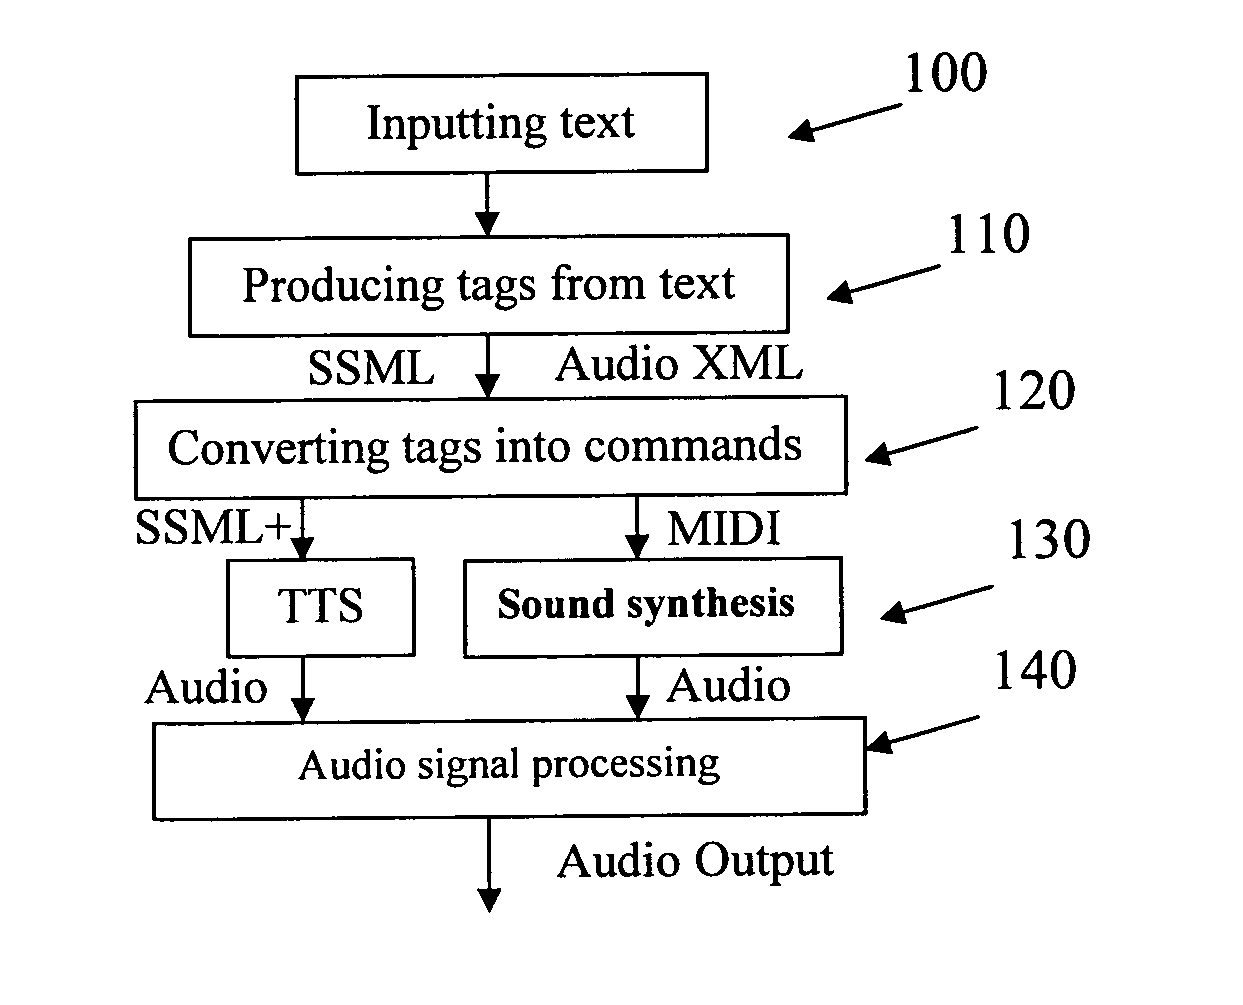 Audio with sound effect generation for text-only applications